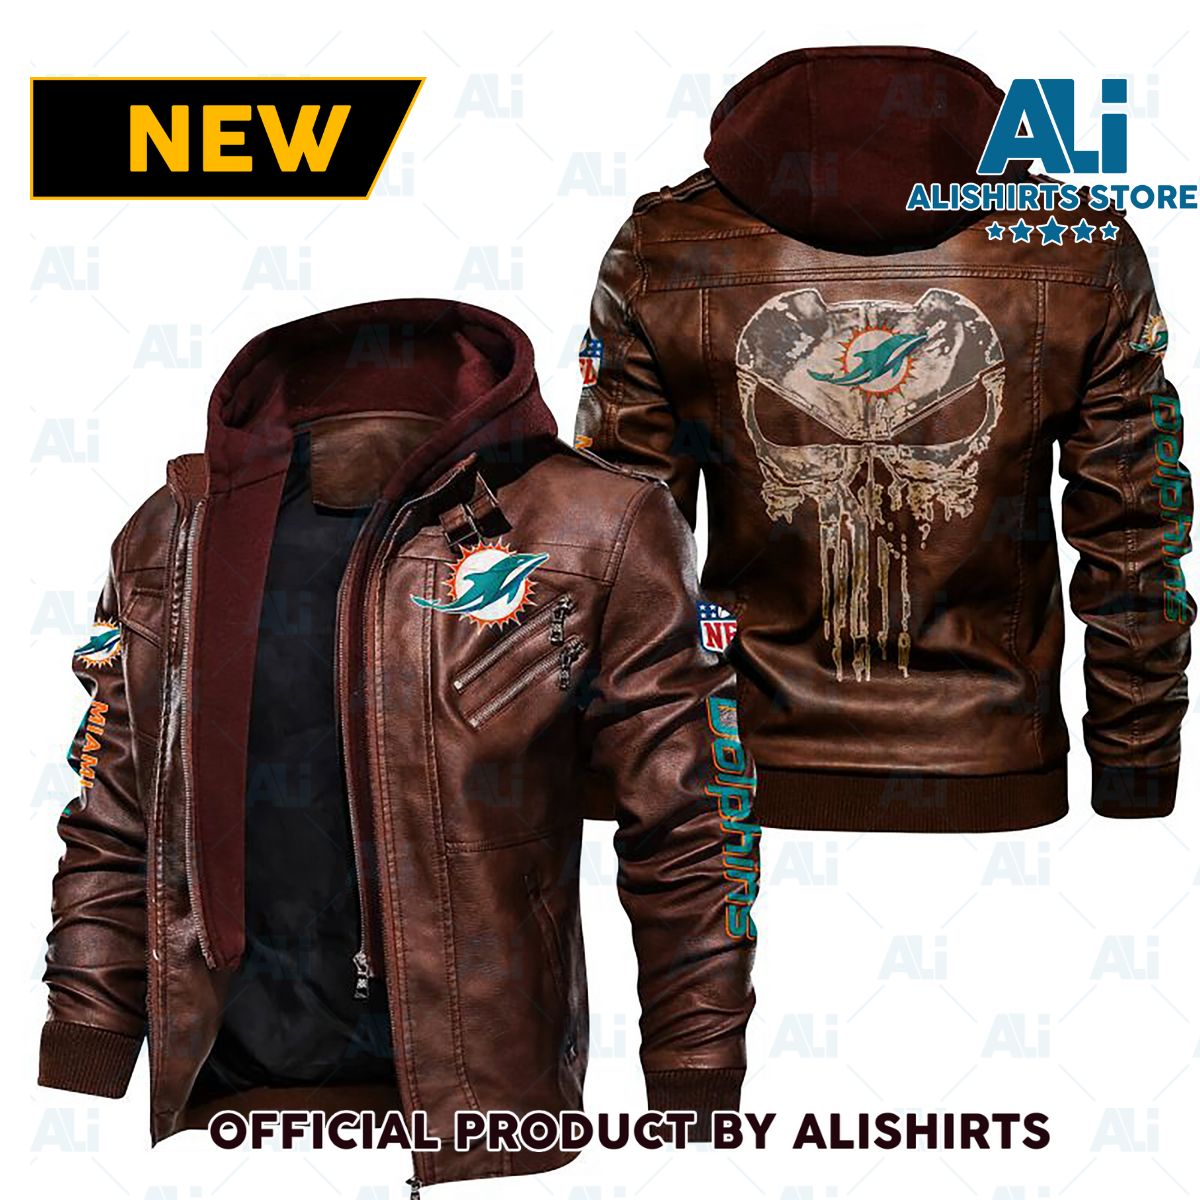 Miami Dolphins Shop - NFL MIAMI DOLPHINS THE PUNISHER LEATHER JACKET V1